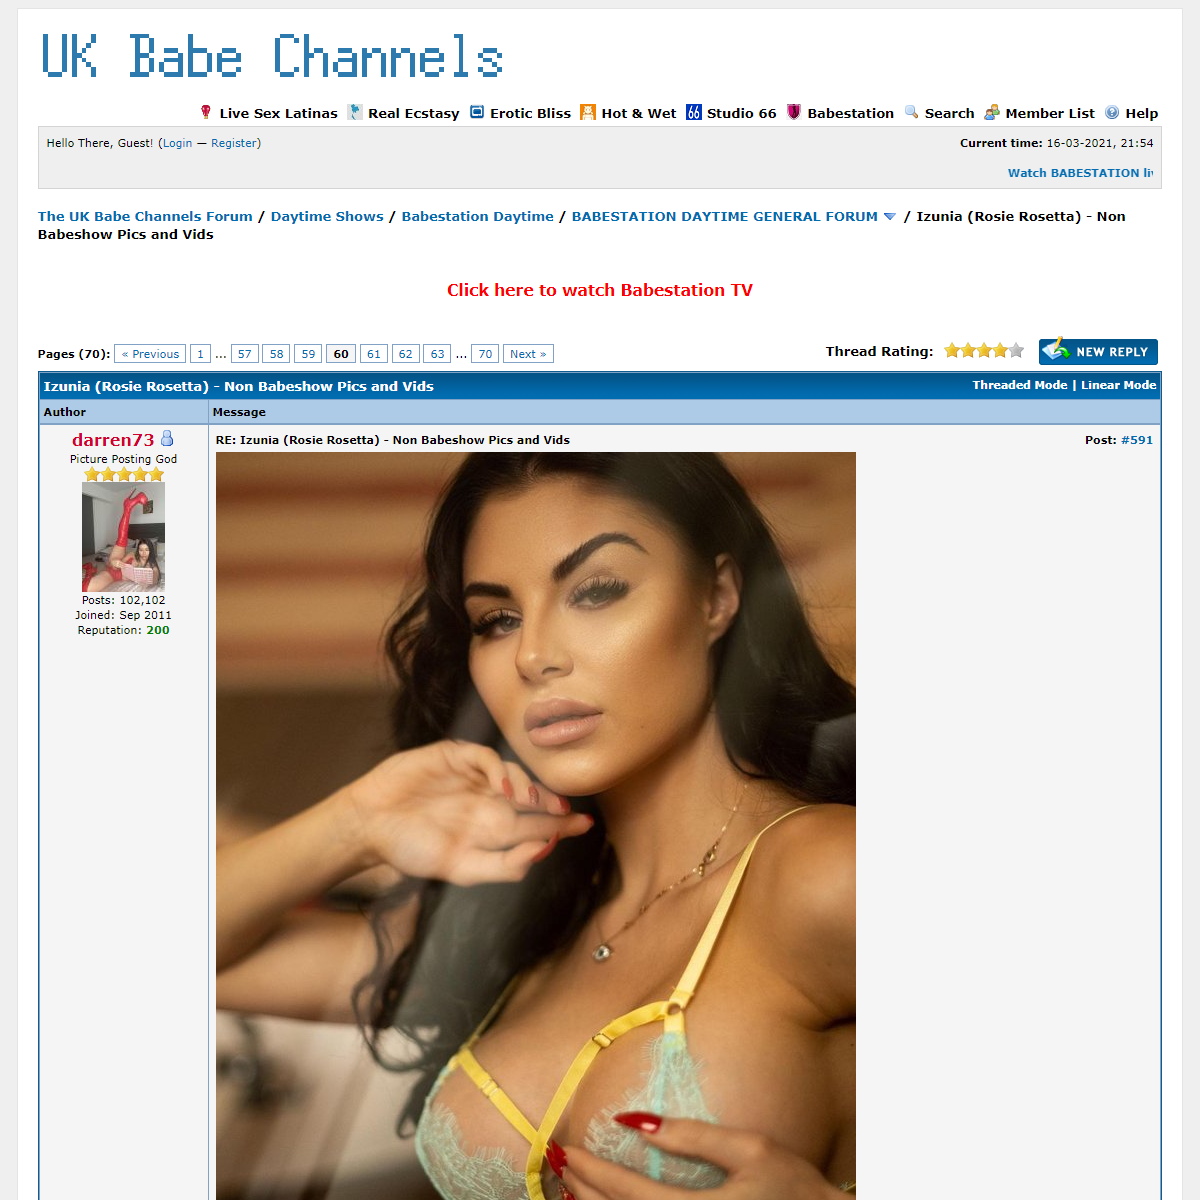 A complete backup of https://babeshows.co.uk/showthread.php?tid=76685&page=60